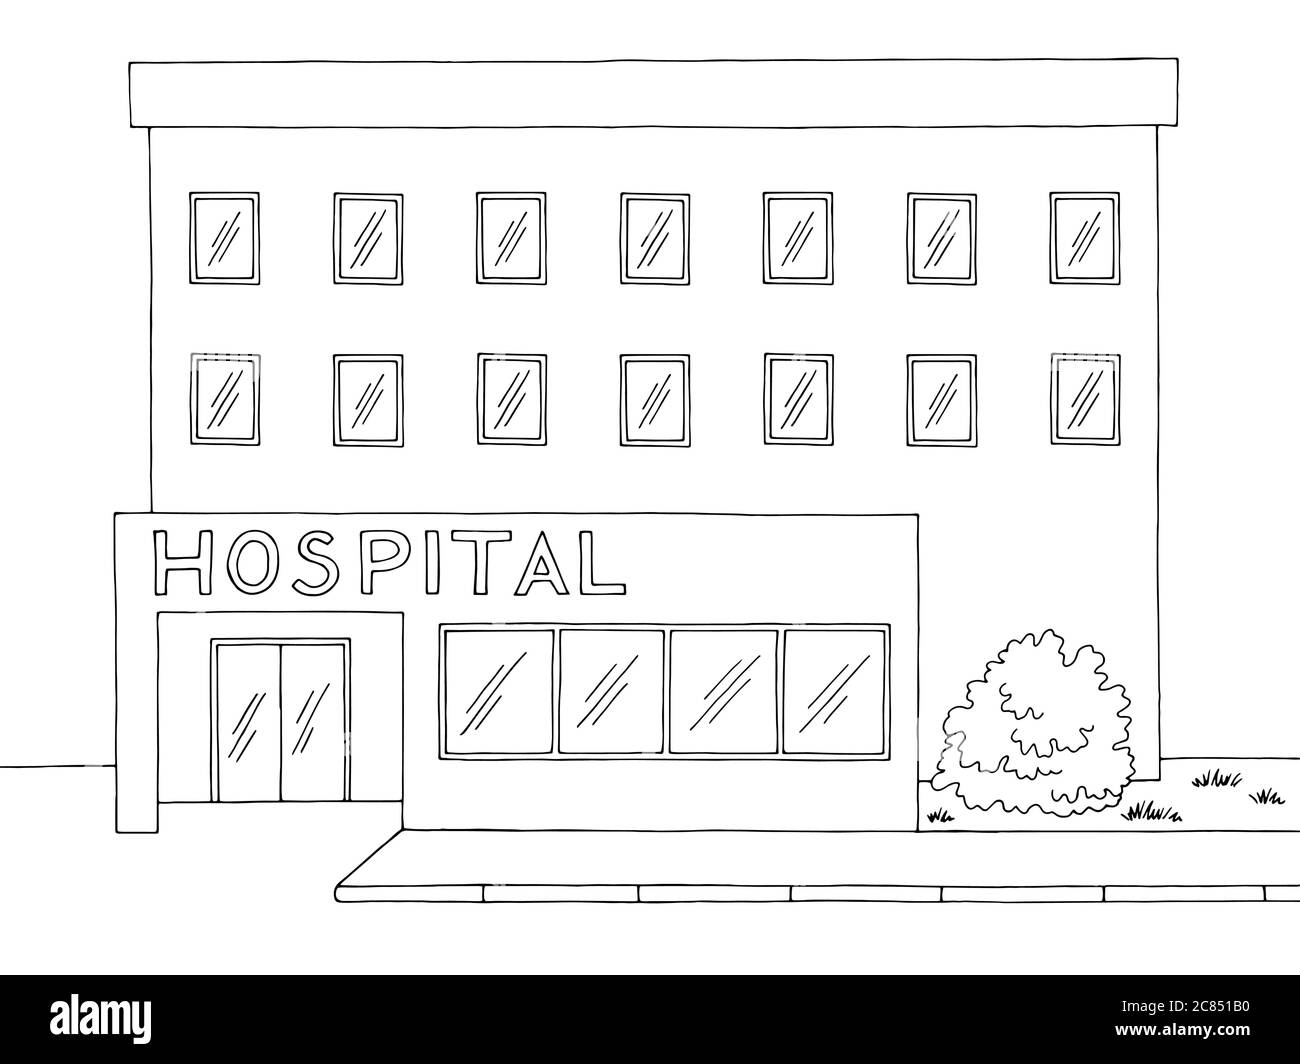 Hospital building front view graphic black white sketch illustration vector Stock Vector